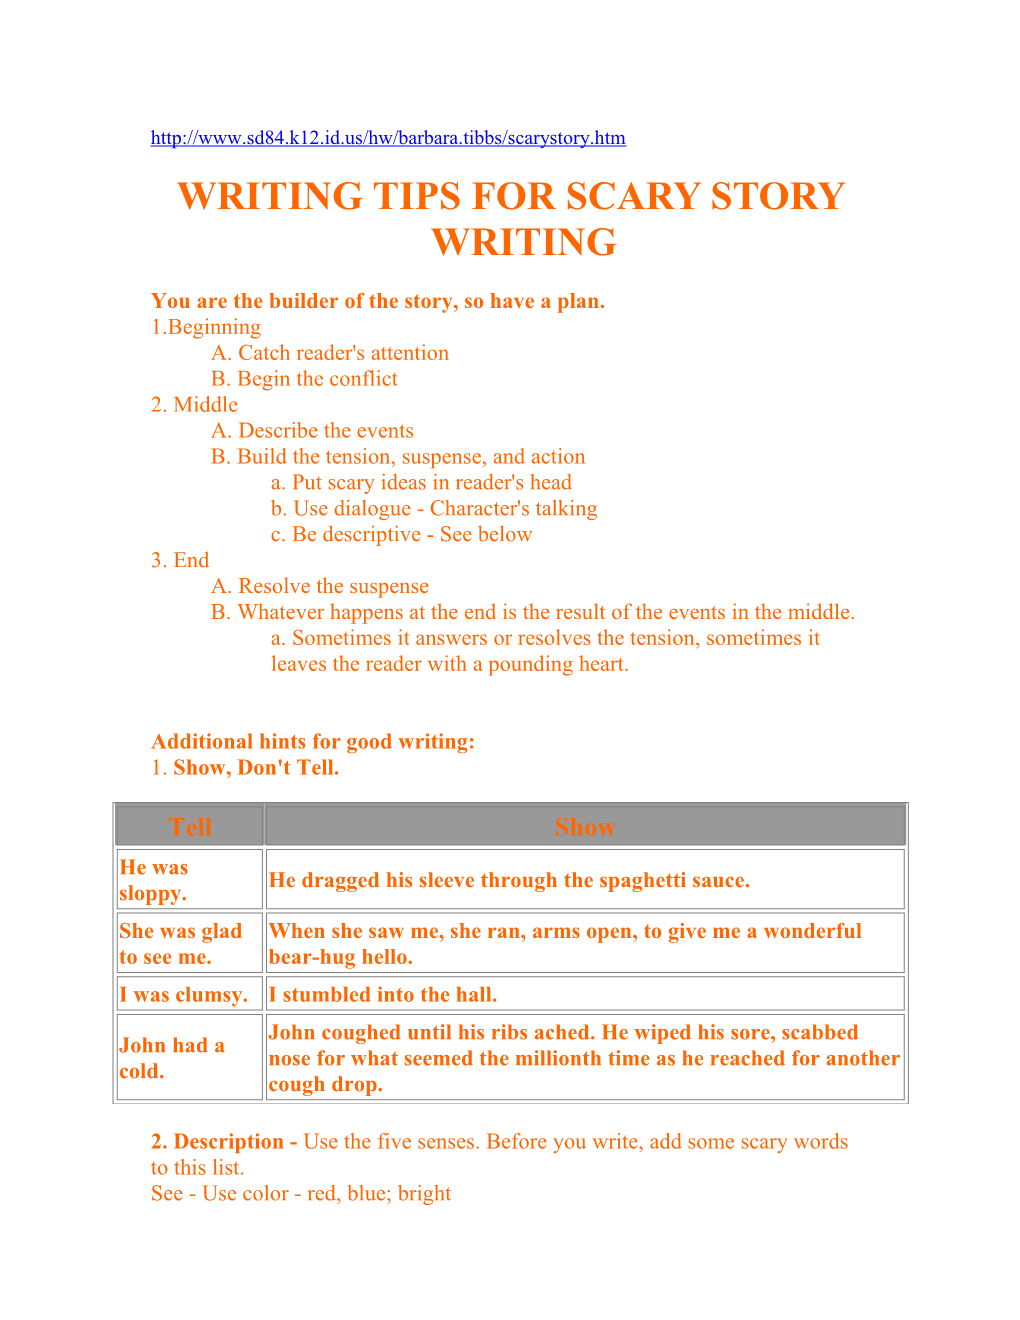 Rubric for Scary Short Story